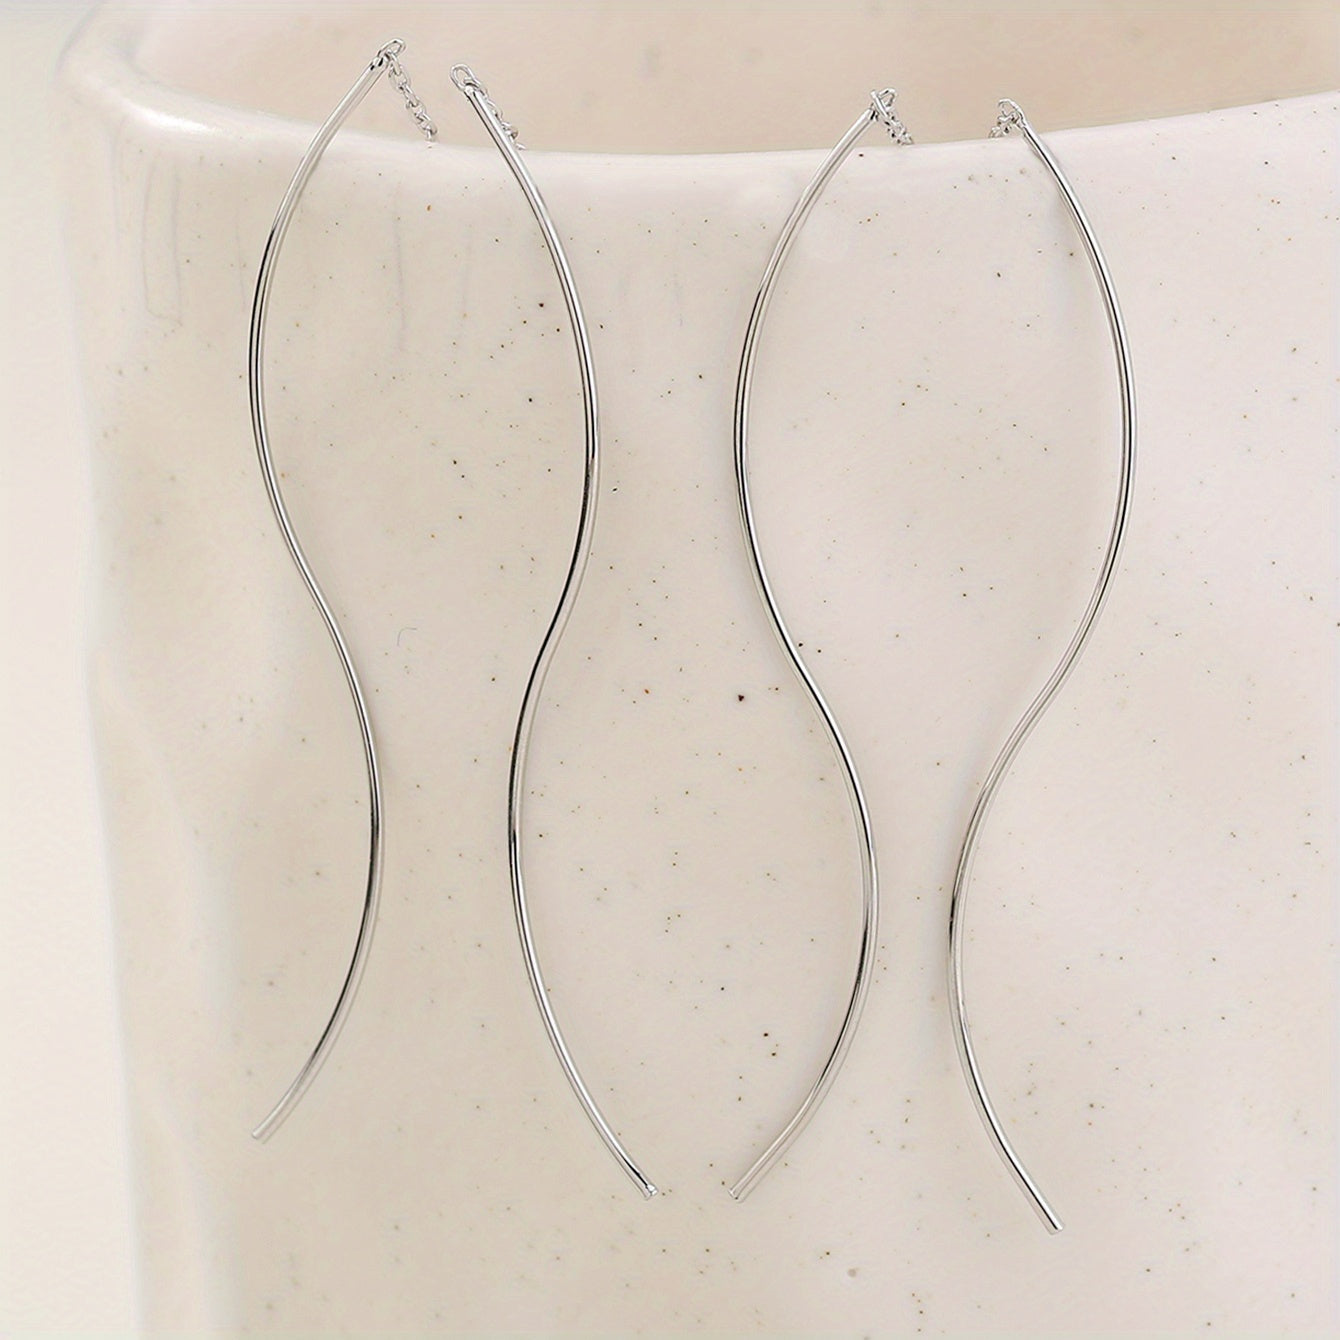 Elevate Your Style with our Elegant Long Tassel Threader Earrings - Wave Shaped Design